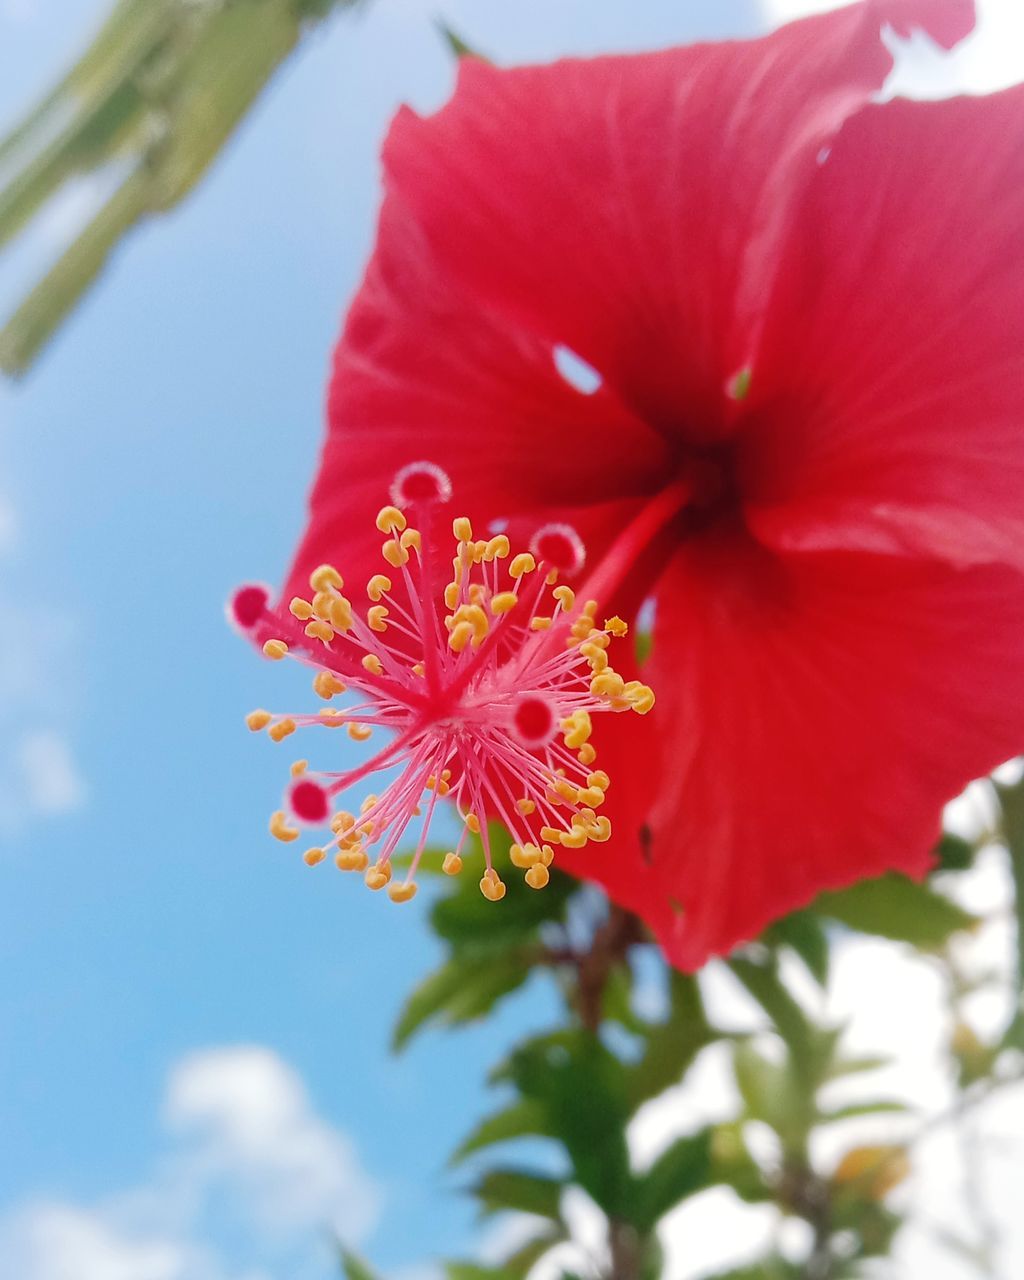 flower, flowering plant, plant, hibiscus, beauty in nature, freshness, fragility, petal, close-up, flower head, inflorescence, nature, growth, malvales, pollen, red, stamen, no people, blossom, sky, outdoors, day, focus on foreground, pink, springtime, botany, vibrant color, selective focus